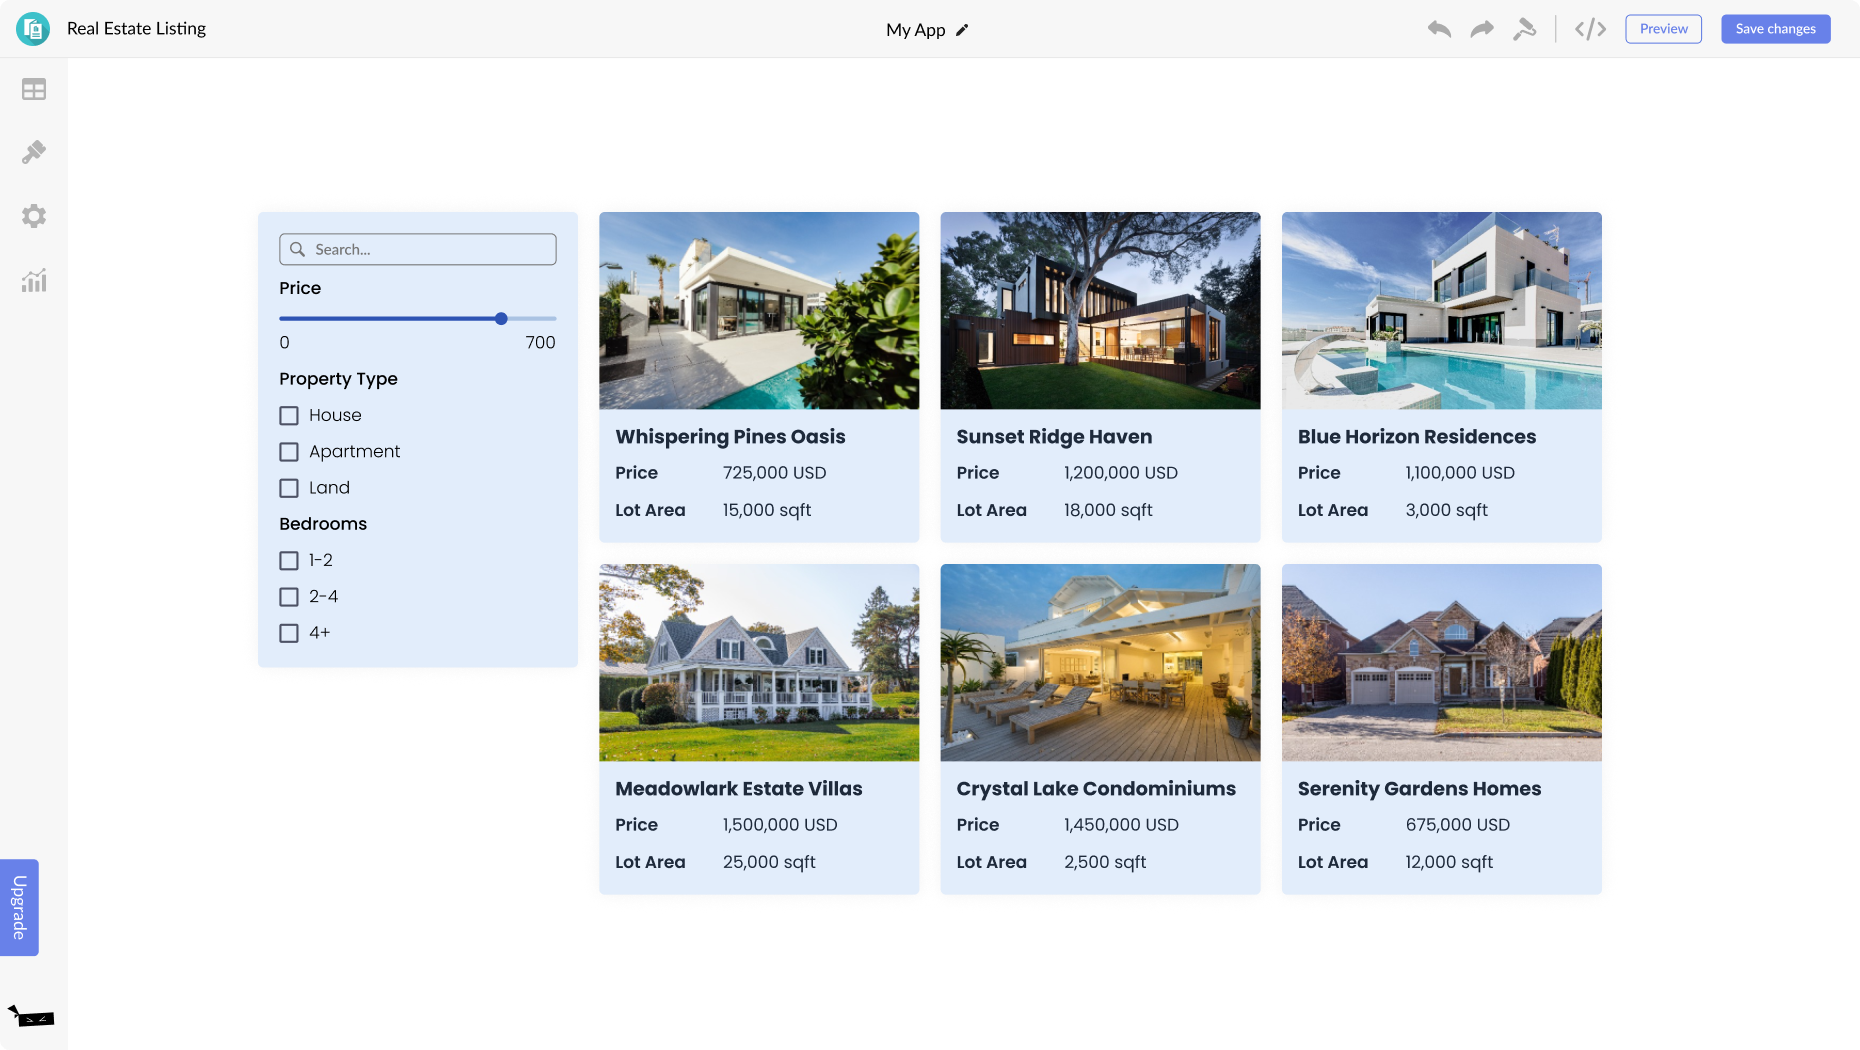 Real Estate Listings for Odoo